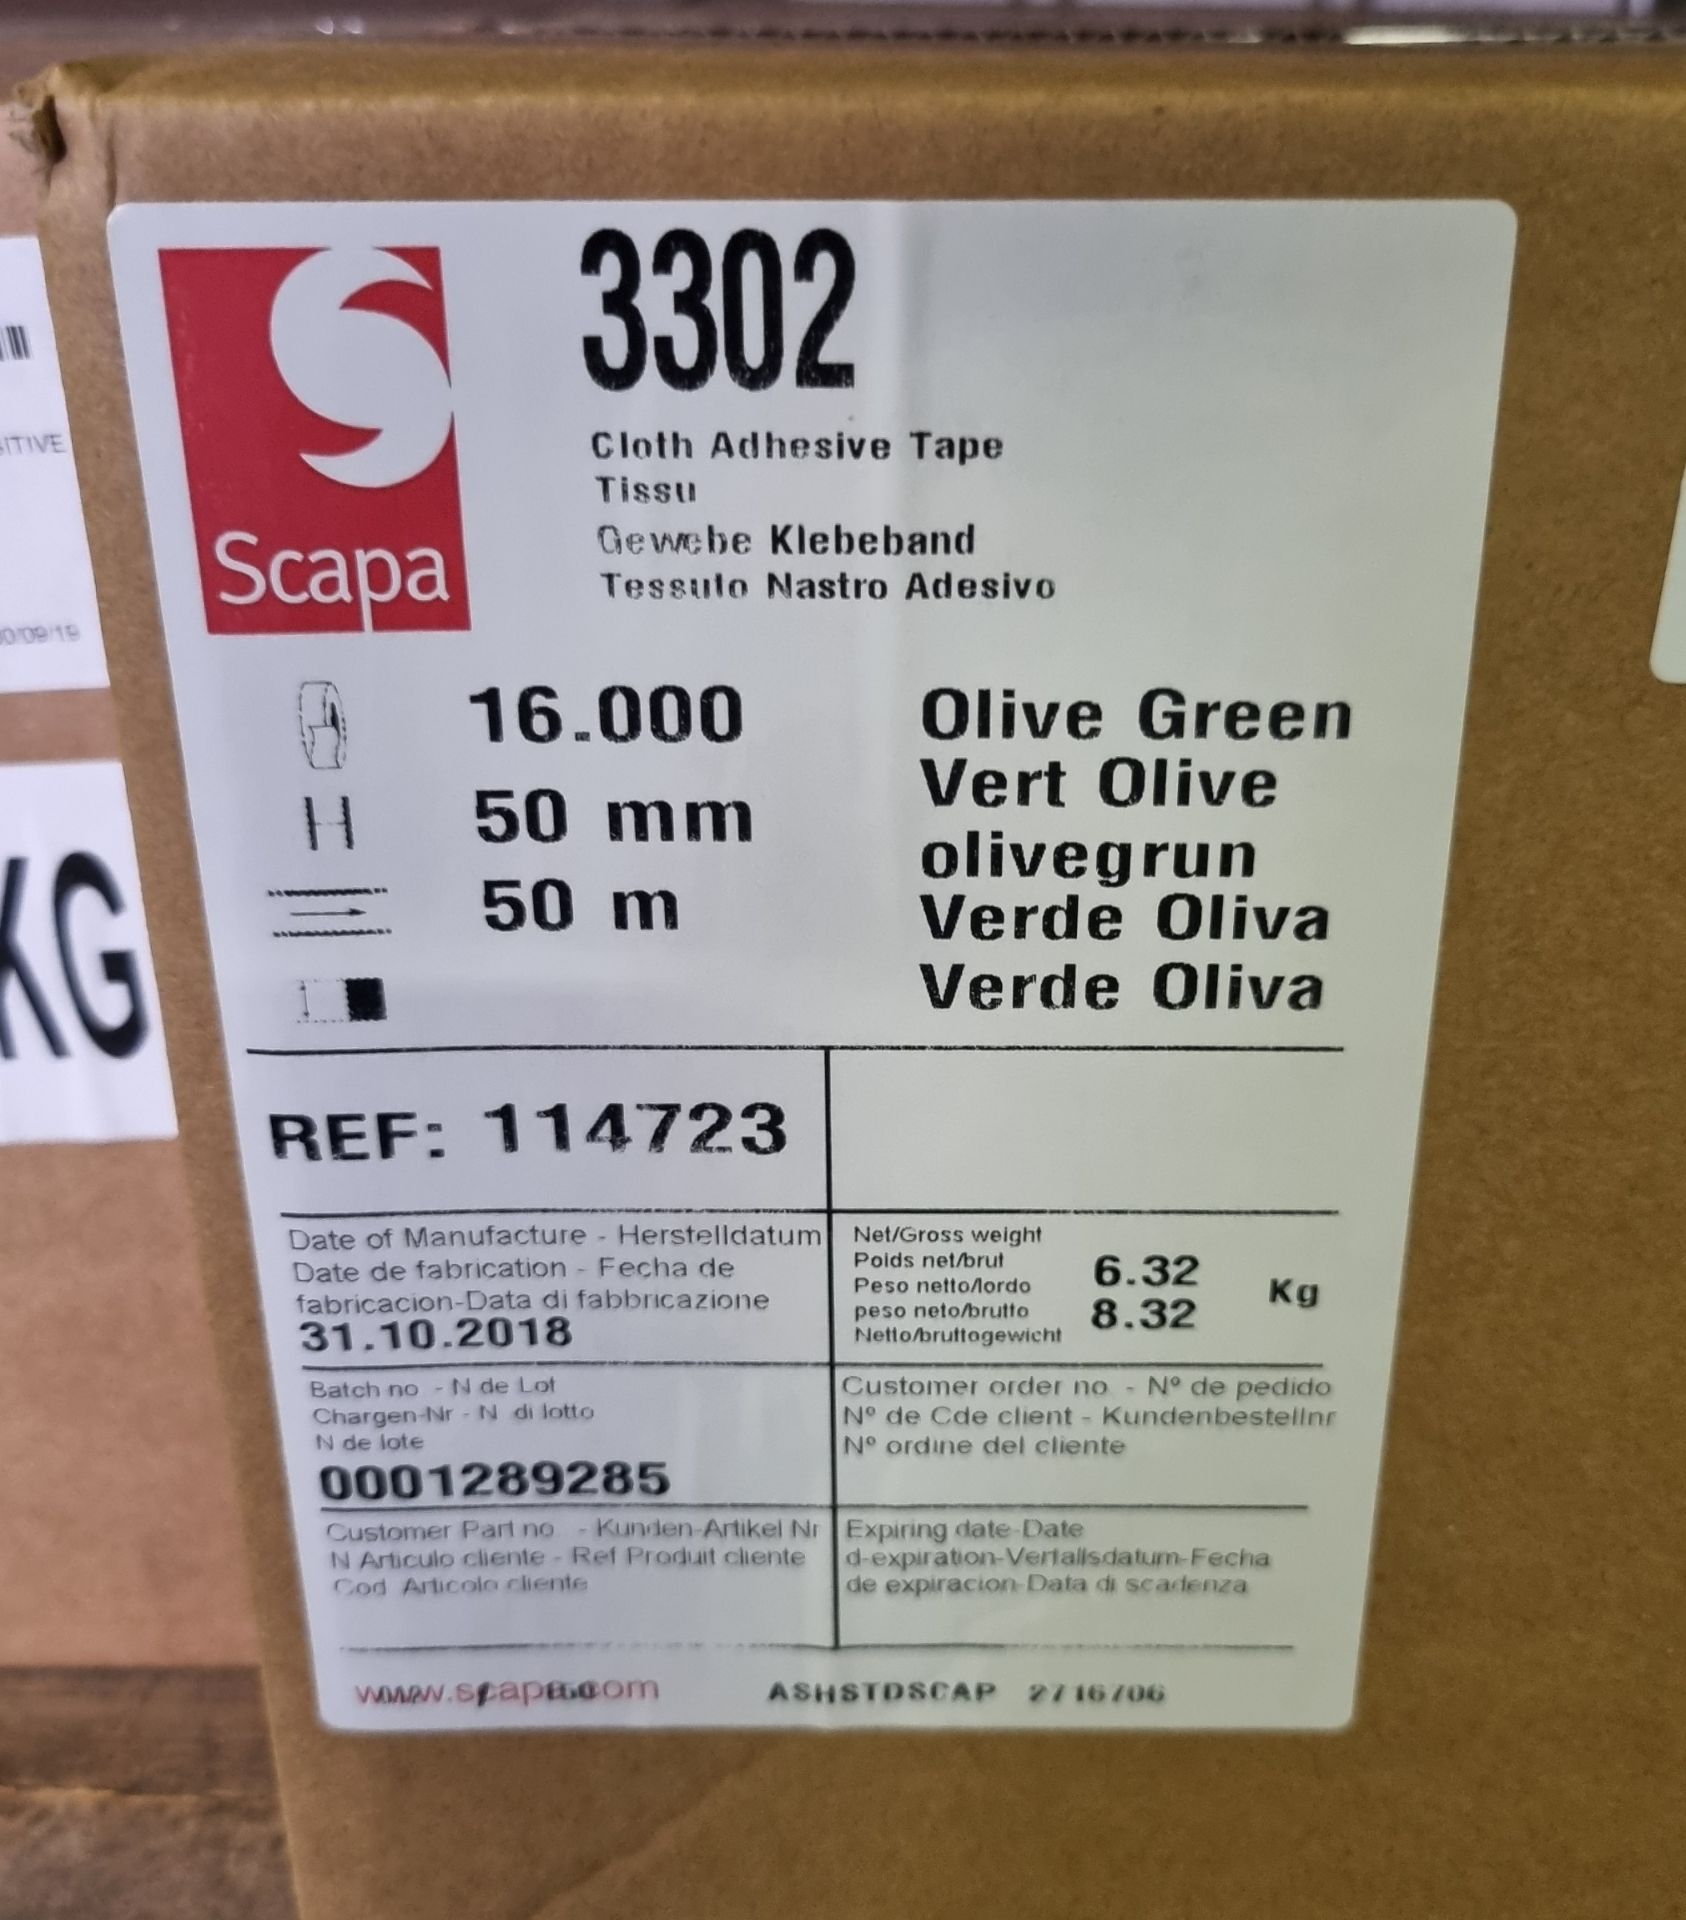 6x boxes of Scapa 3302 uncoated cotton cloth adhesive tape - olive green - 50mm x 50m - Image 2 of 4